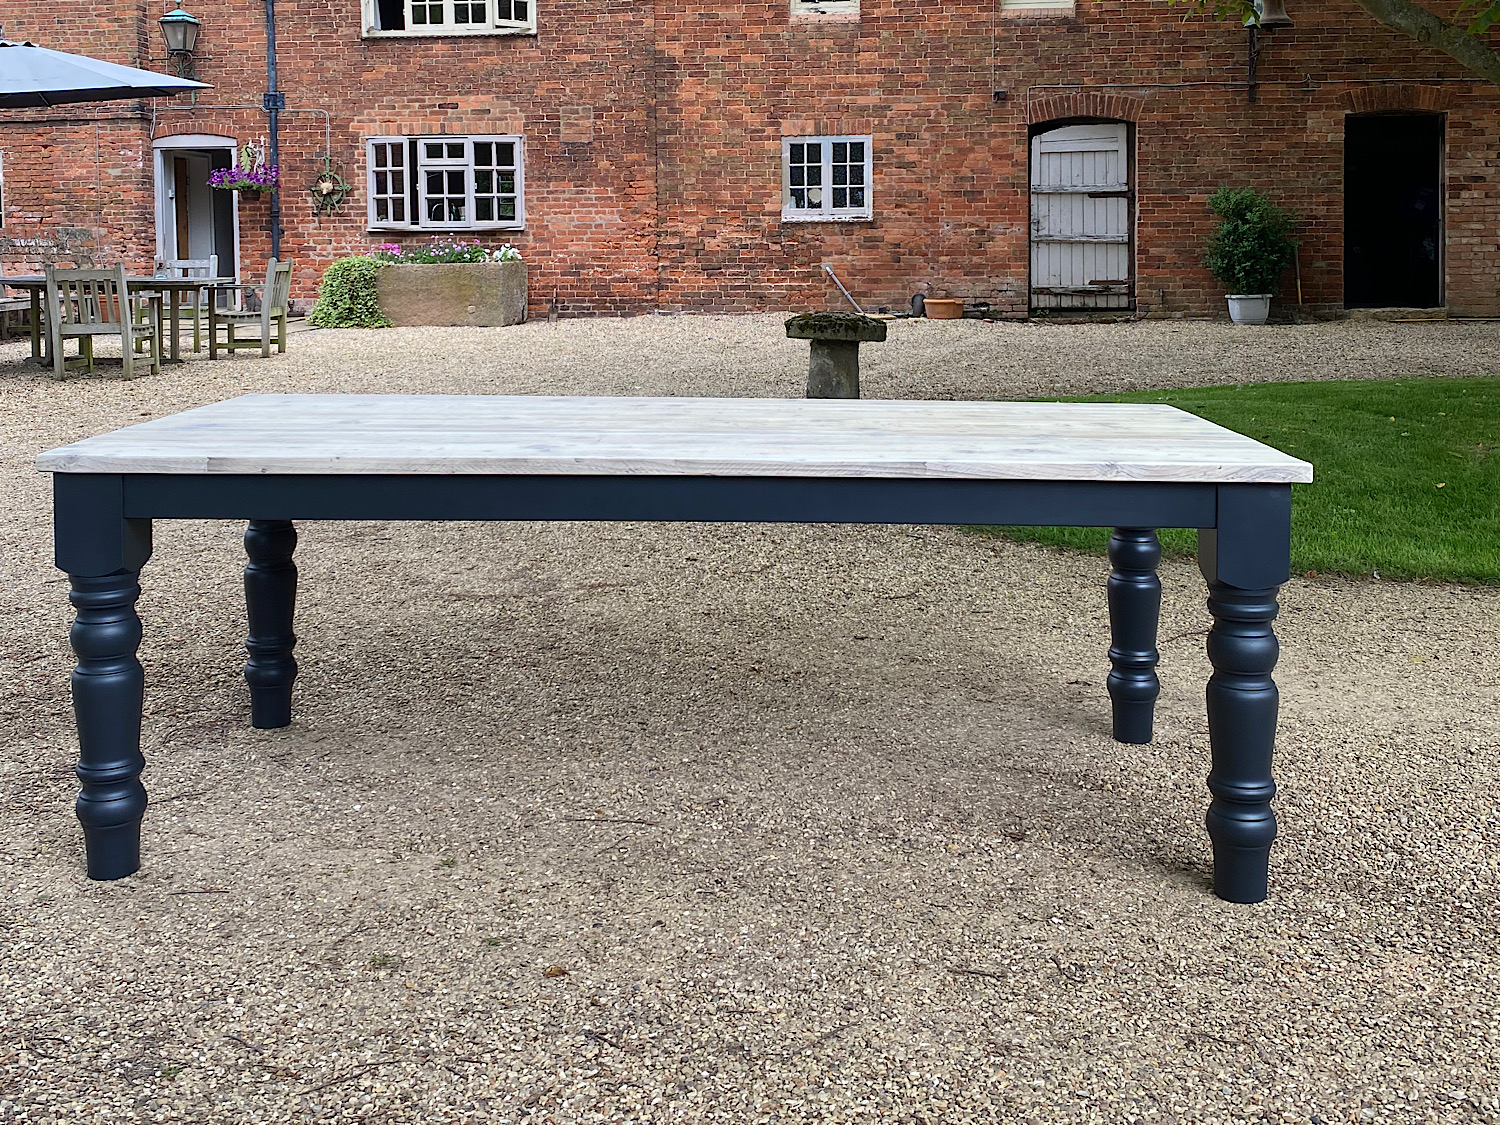 Farmhouse Base Off-Black with Light Patina Finished Top